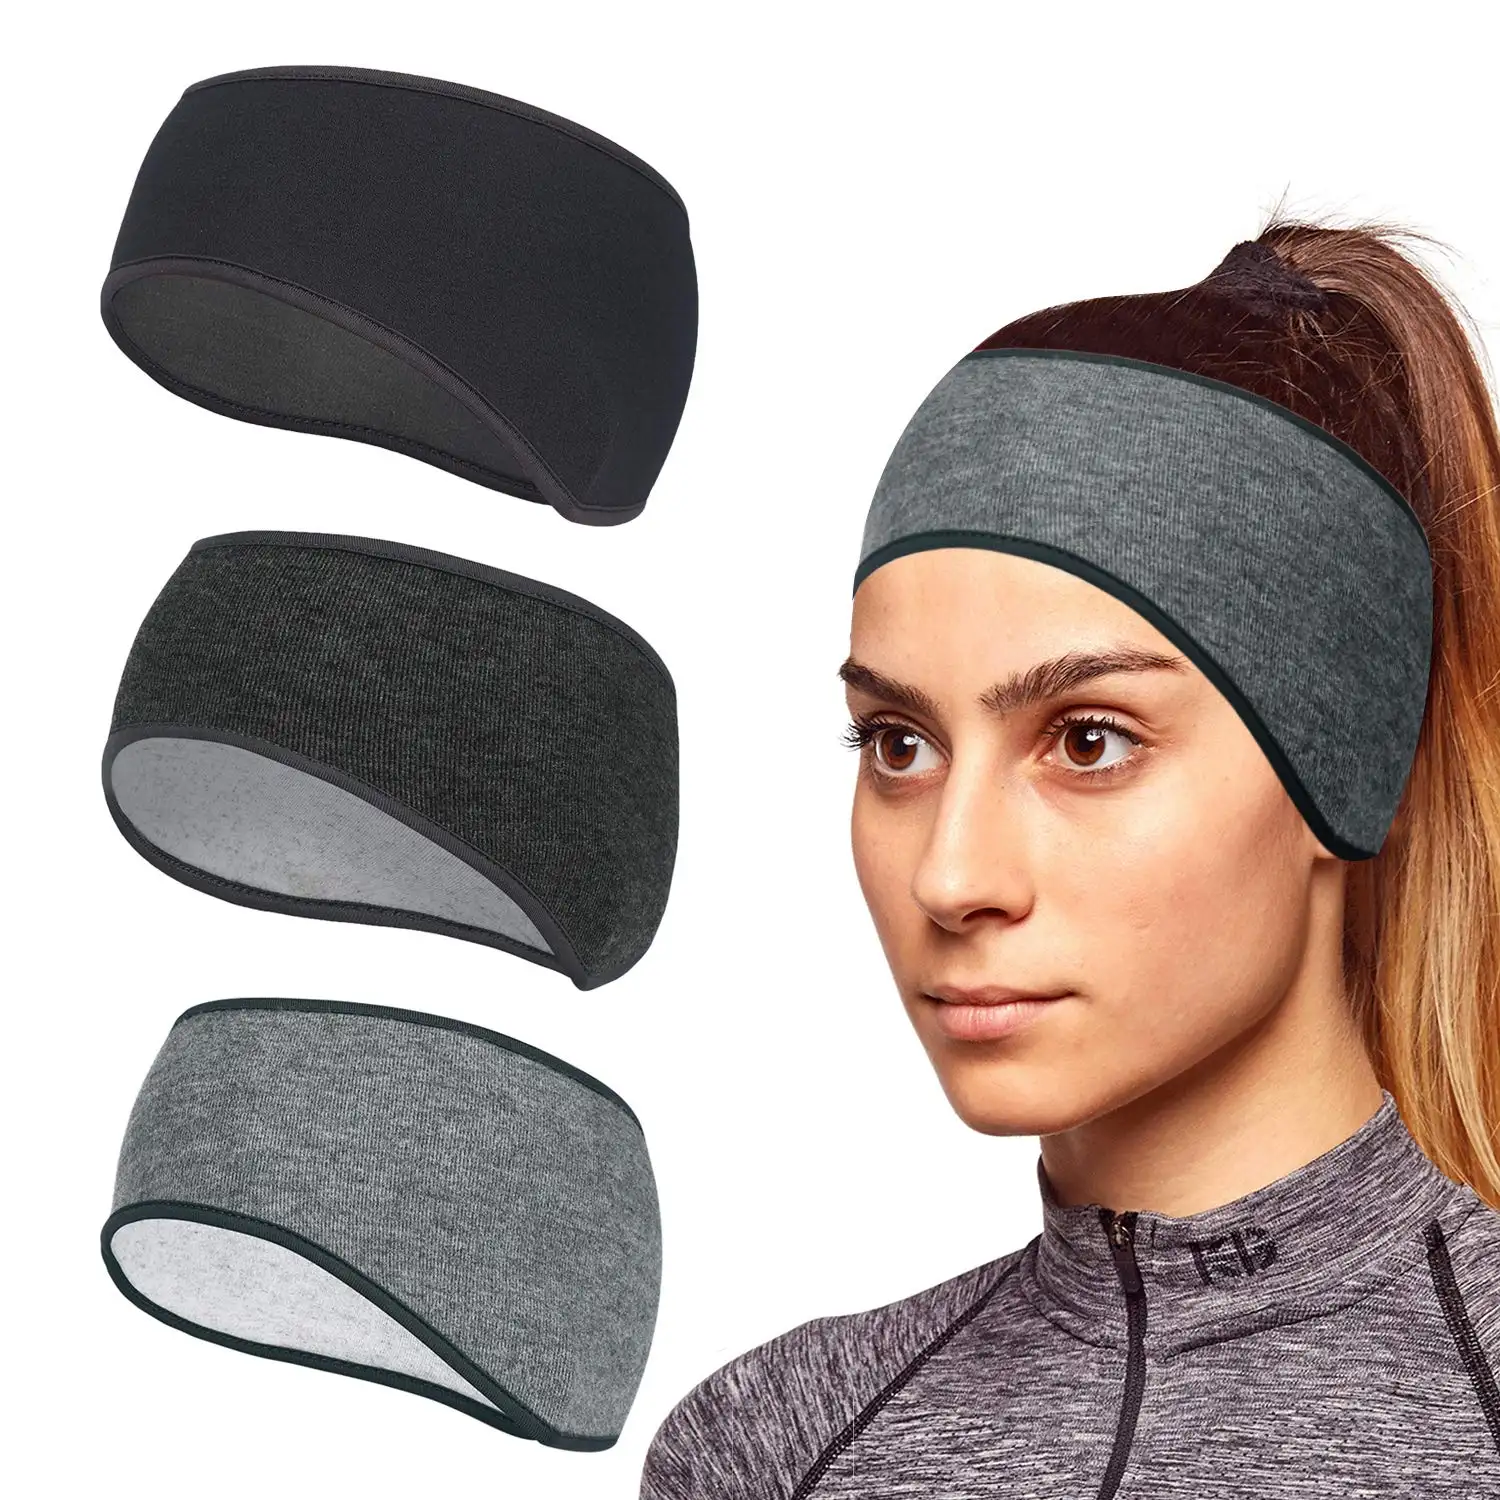 Winter Sports Headbands, 3 Pack Thermal Stretchy Ear Warmers Moisture Wicking Running Head Bands Men and Women Athletic Ear Mu